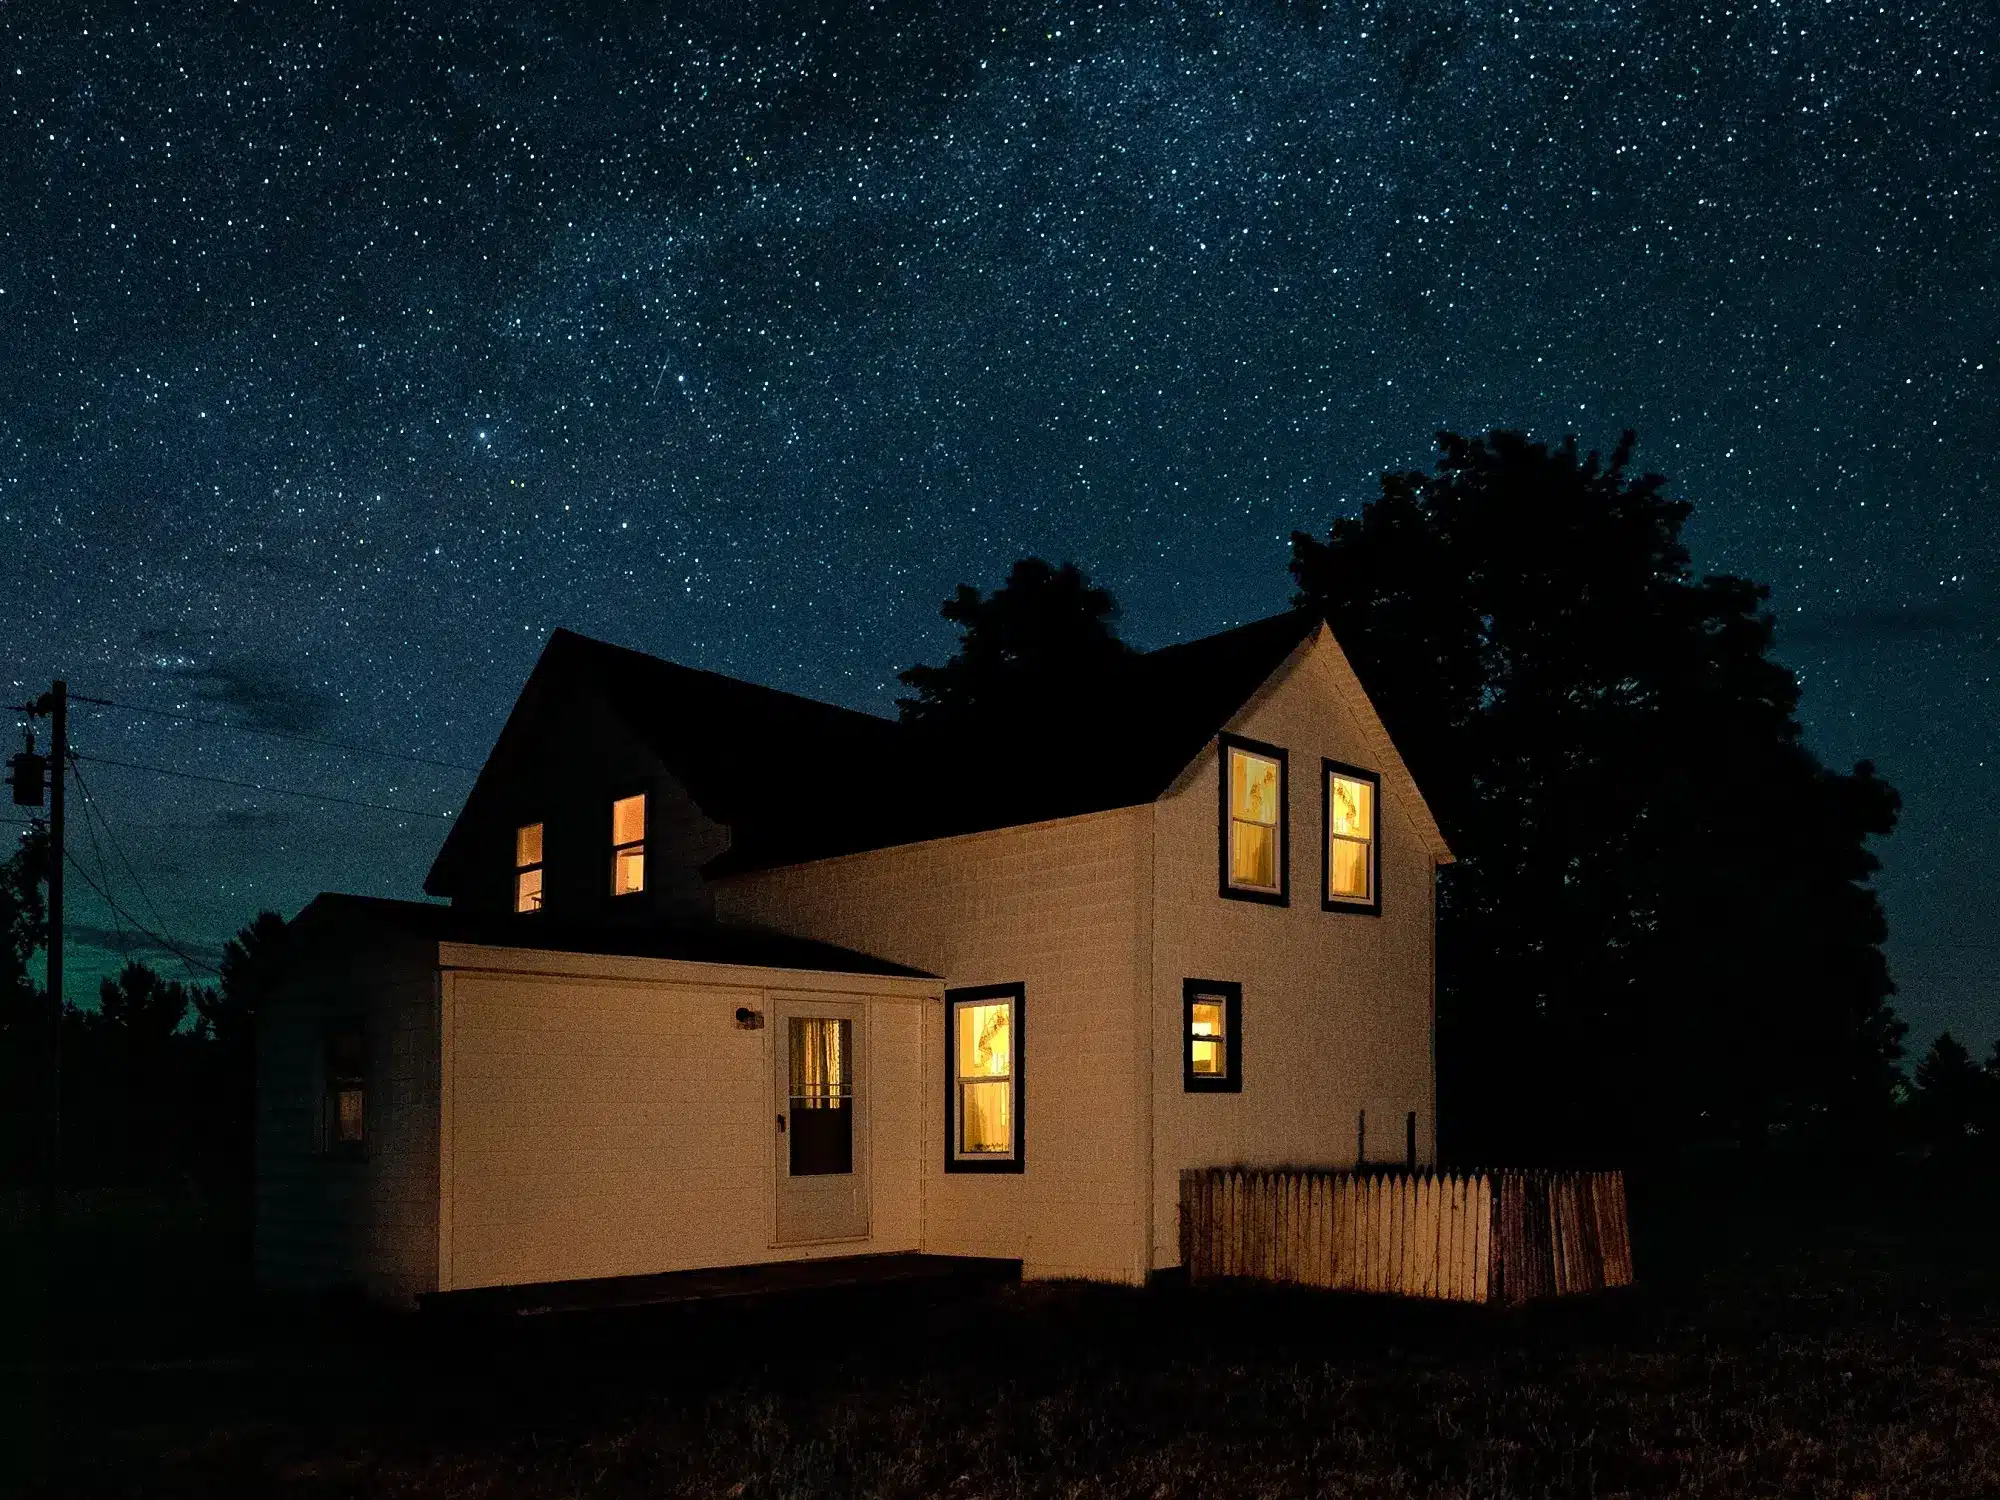 A wooden house illuminated by the night sky.